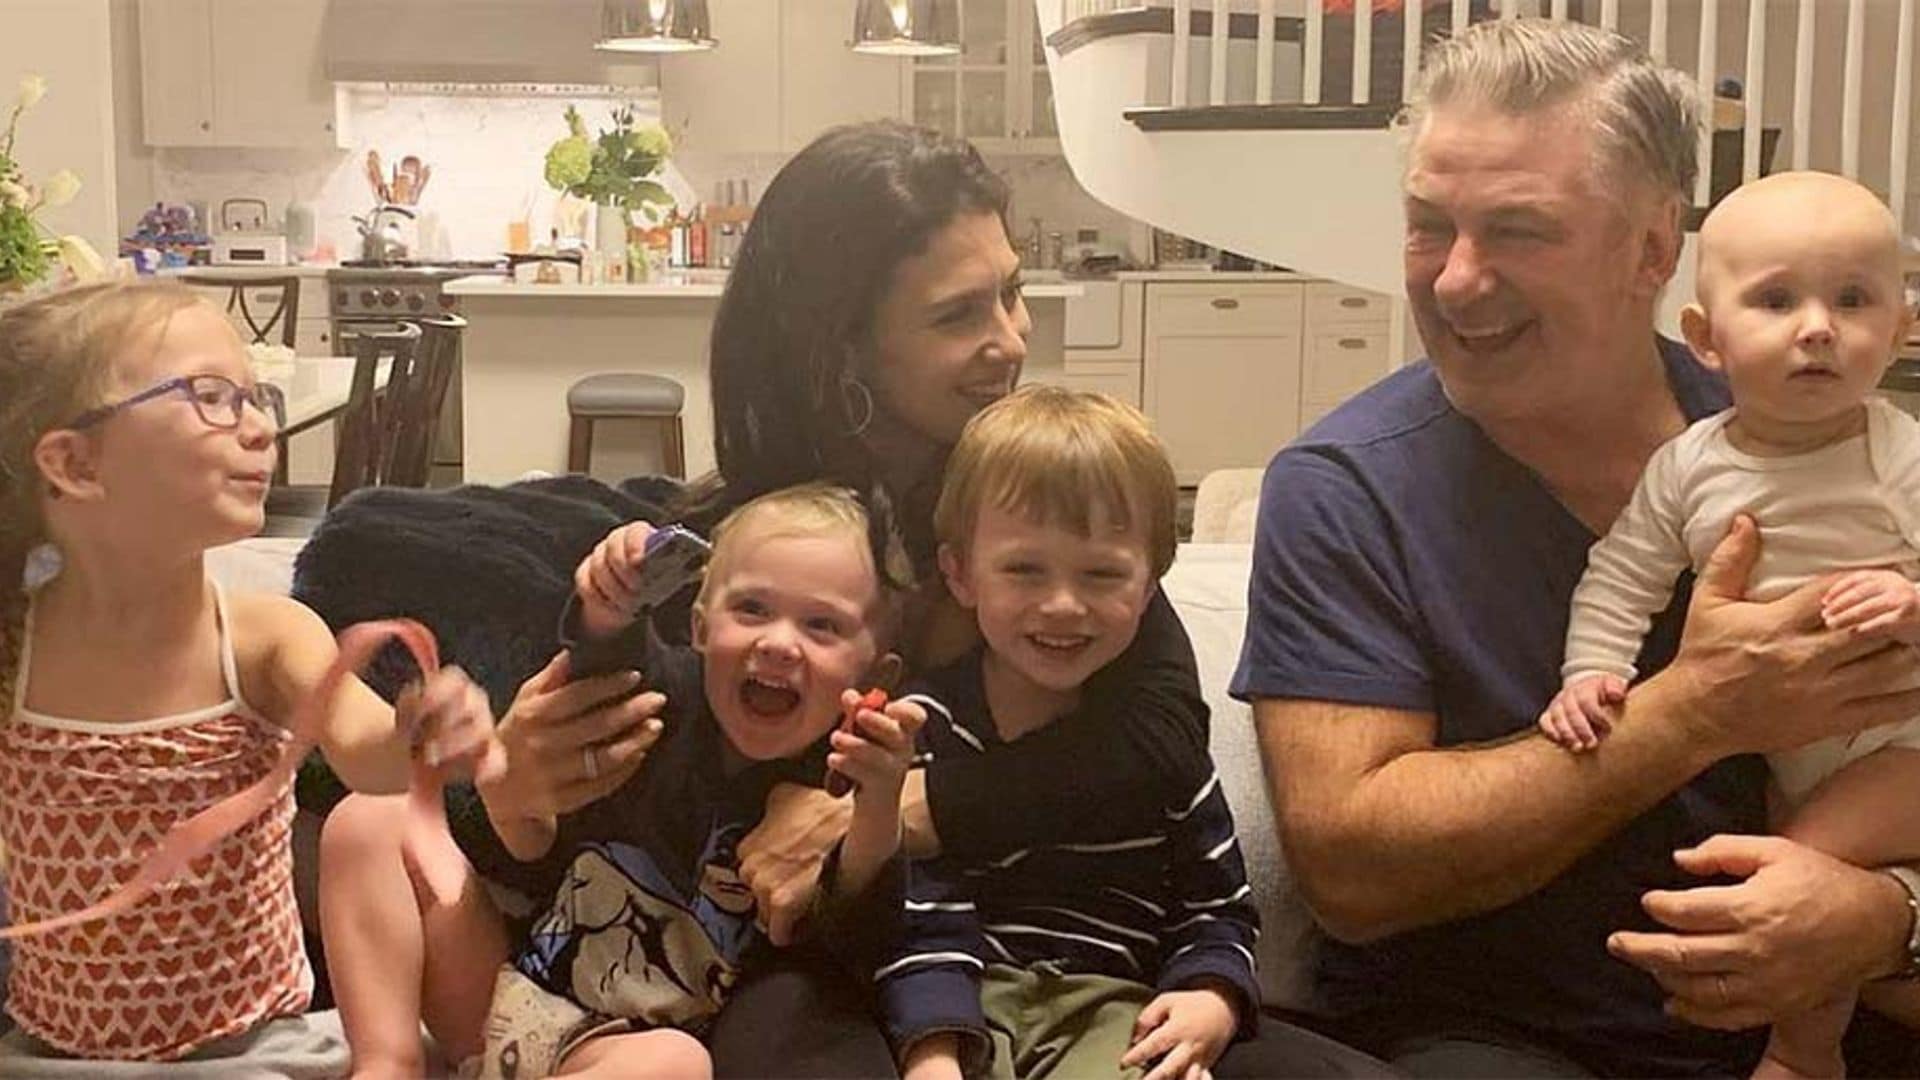 Hilaria Baldwin responds to 'evil' troll after miscarriage post